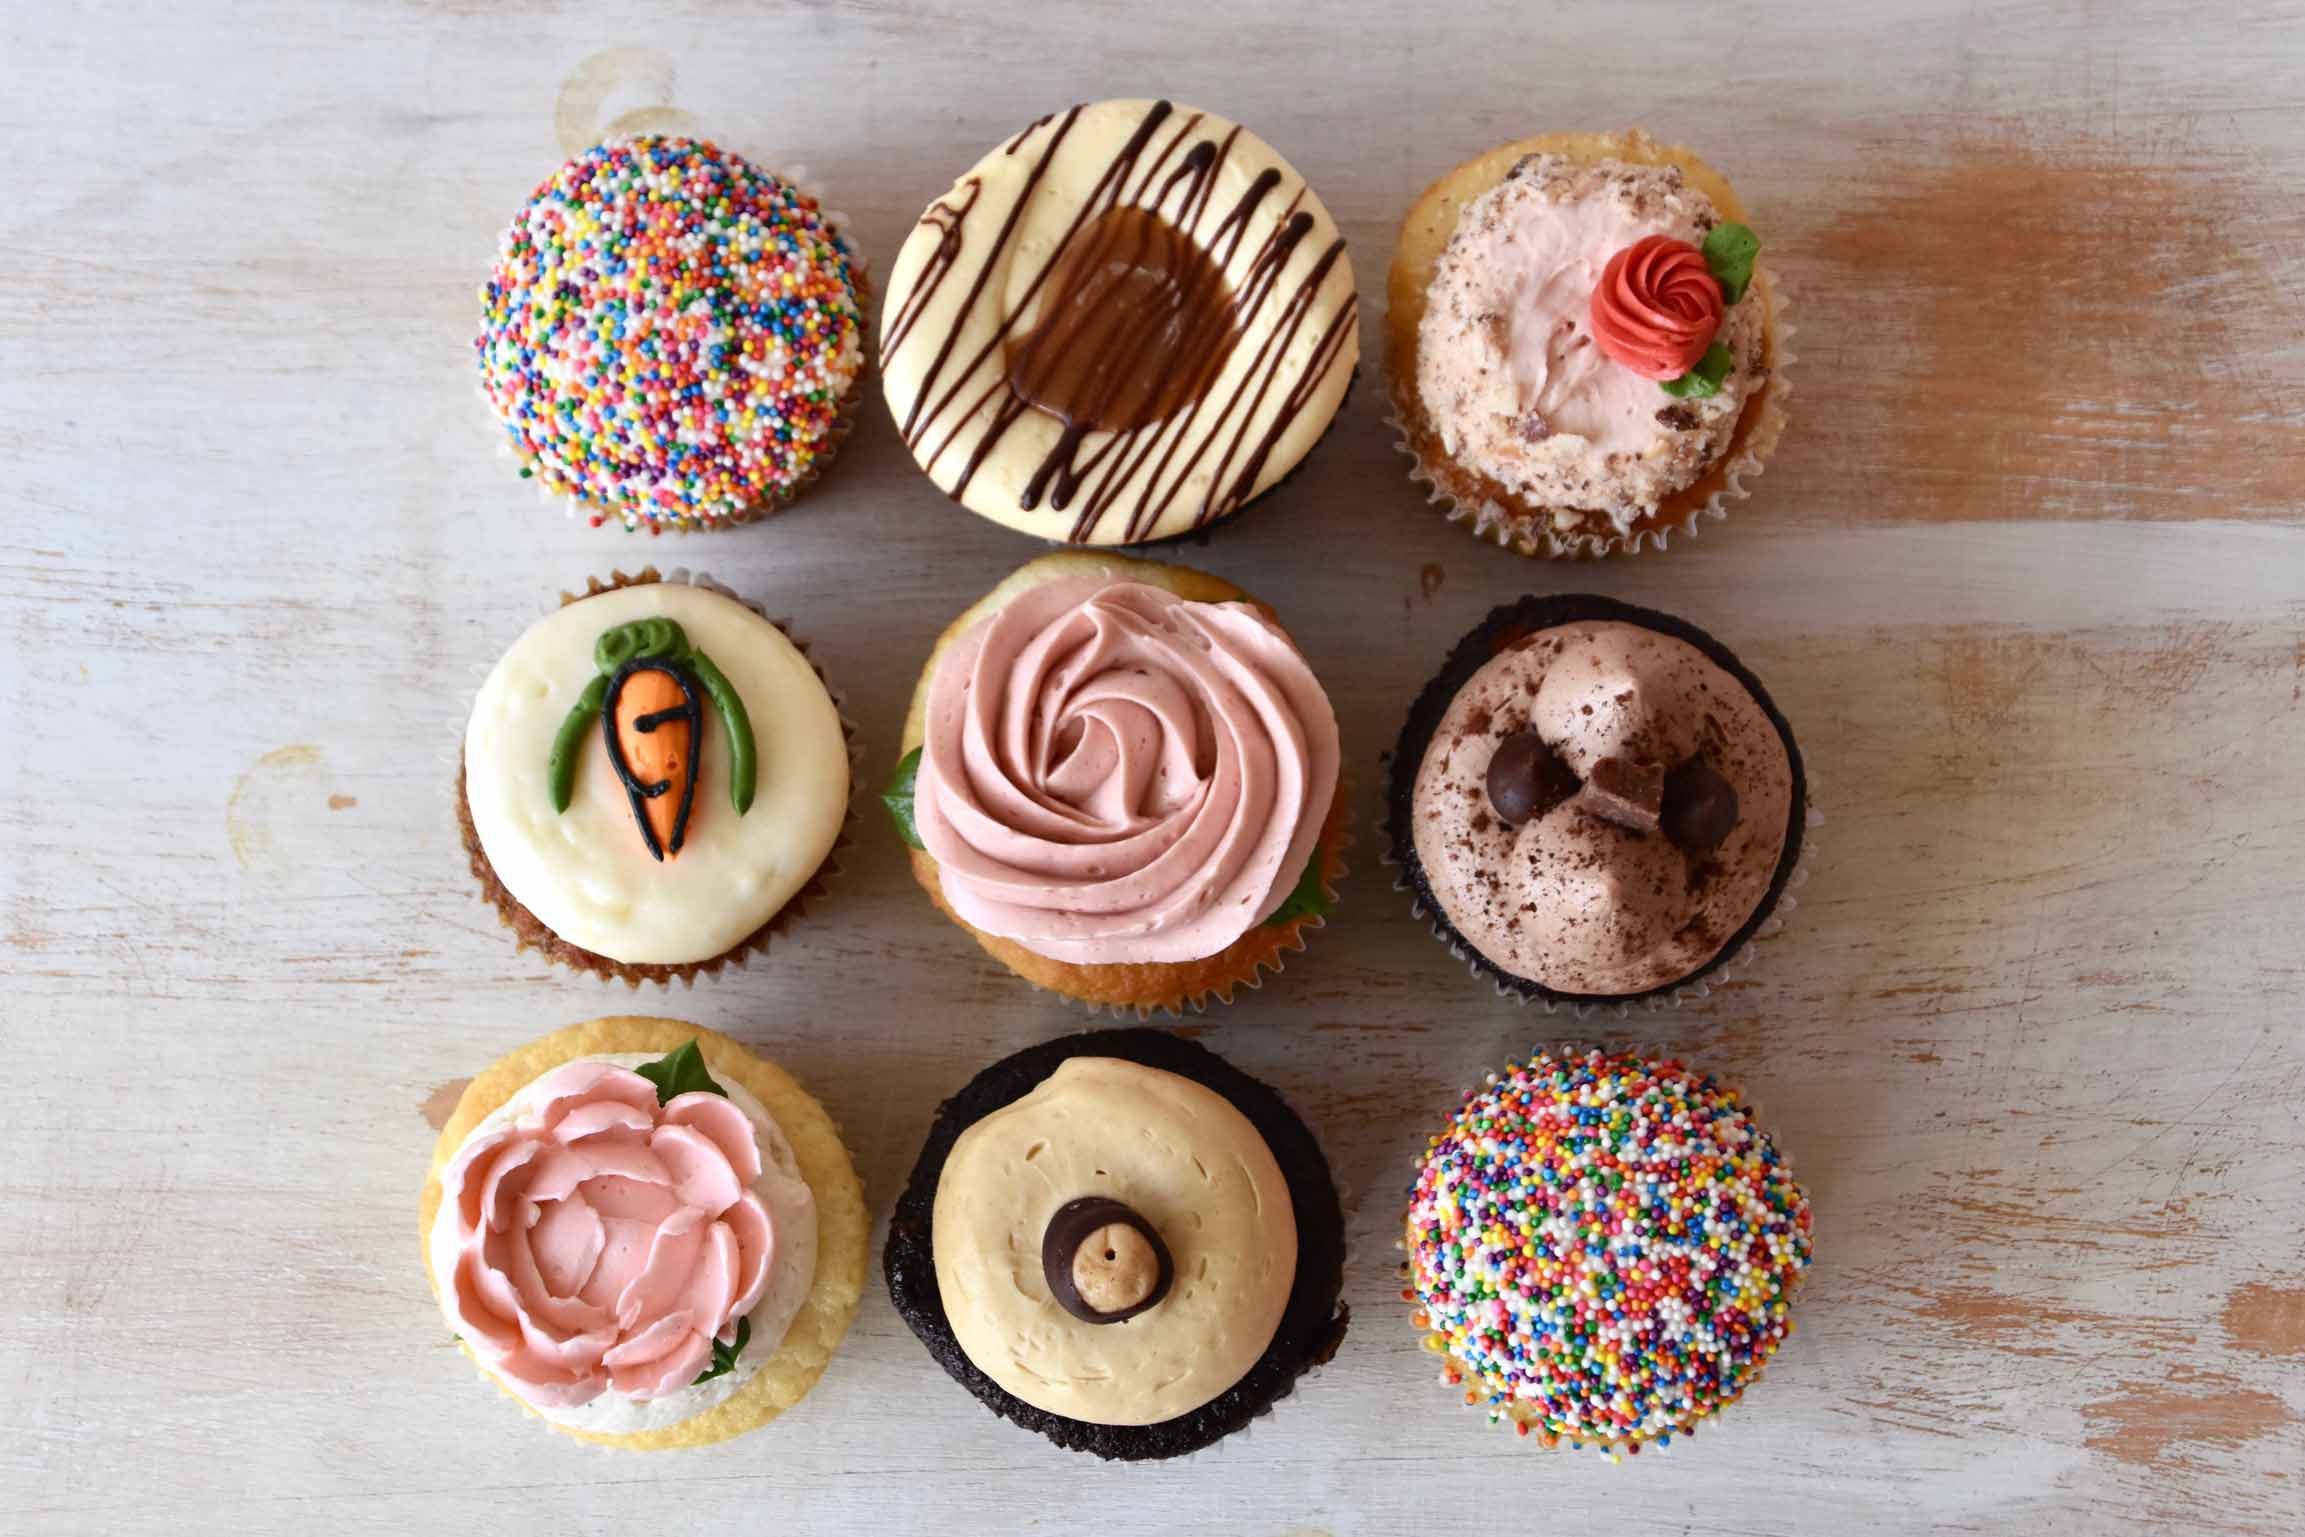 Cupcakes from Bake Me Treats